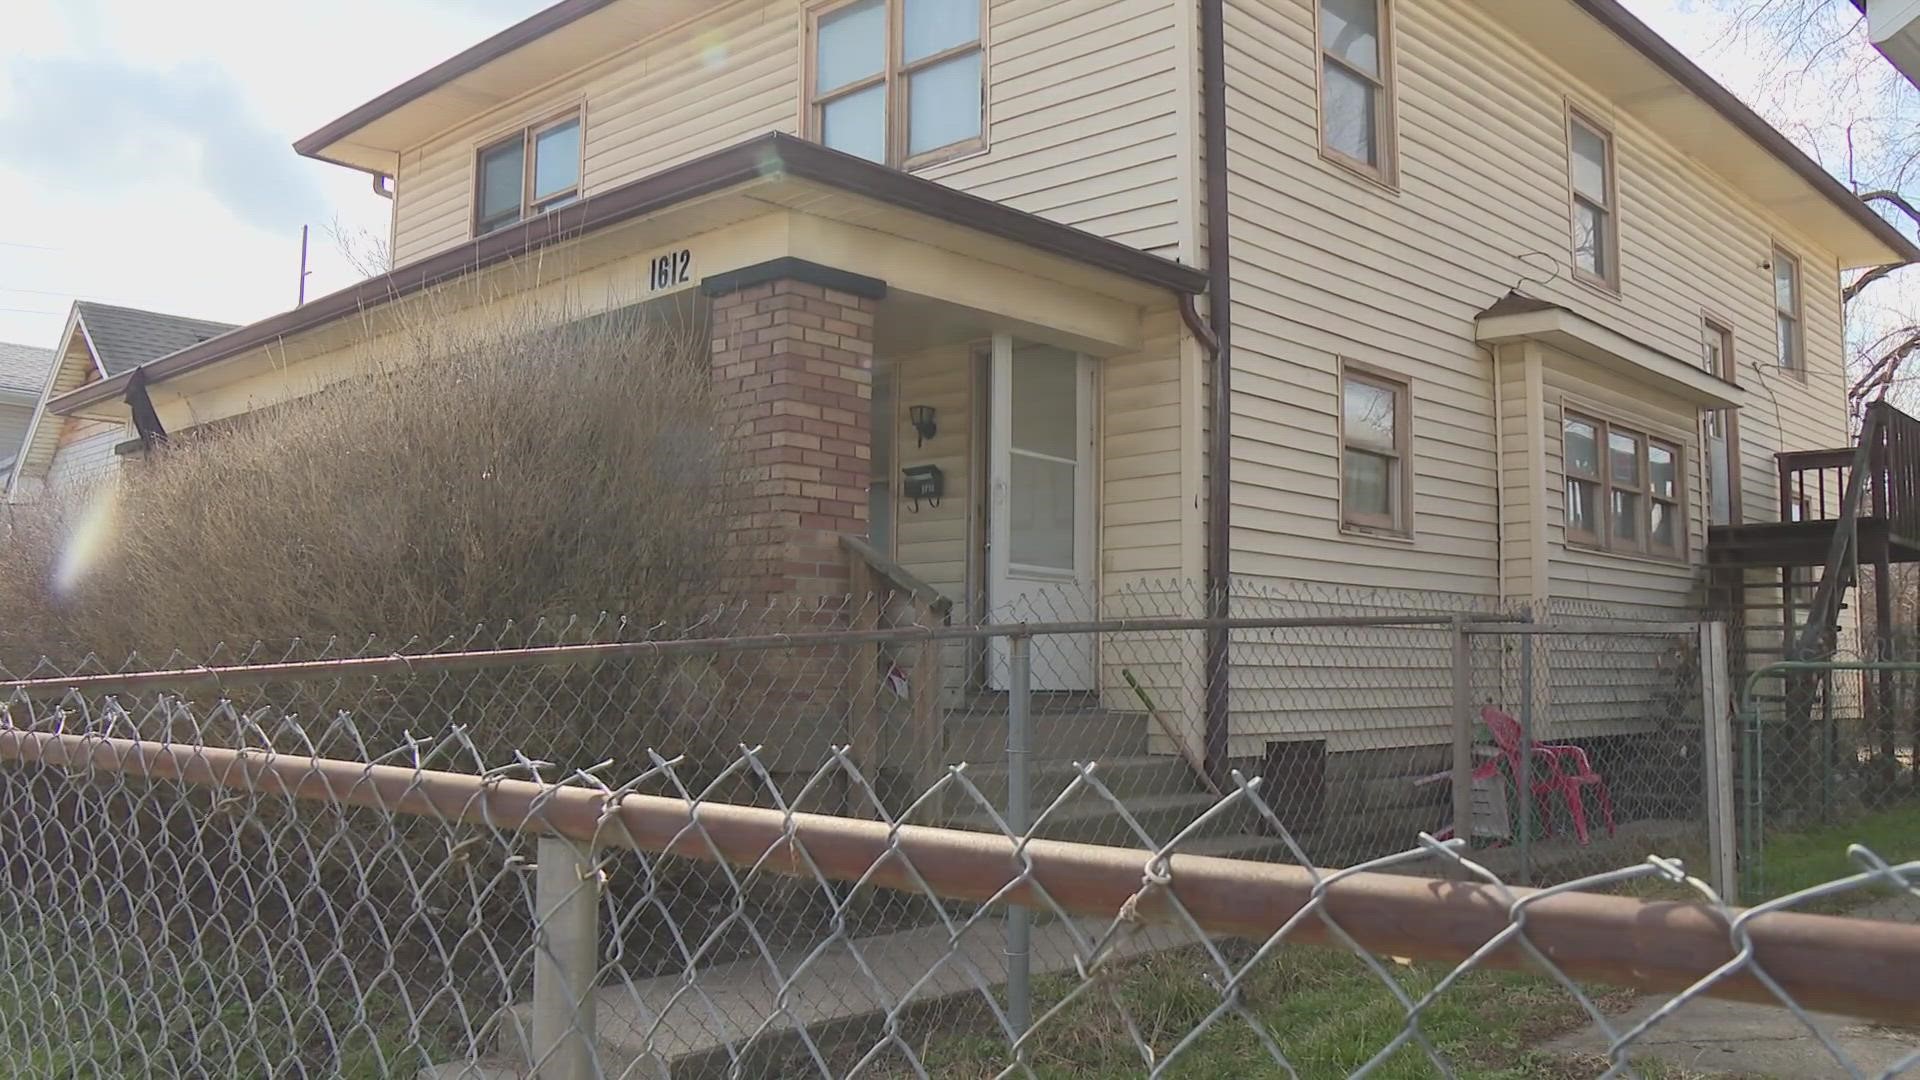 New court documents detail how a pregnant woman was shot inside her Fountain Square home.